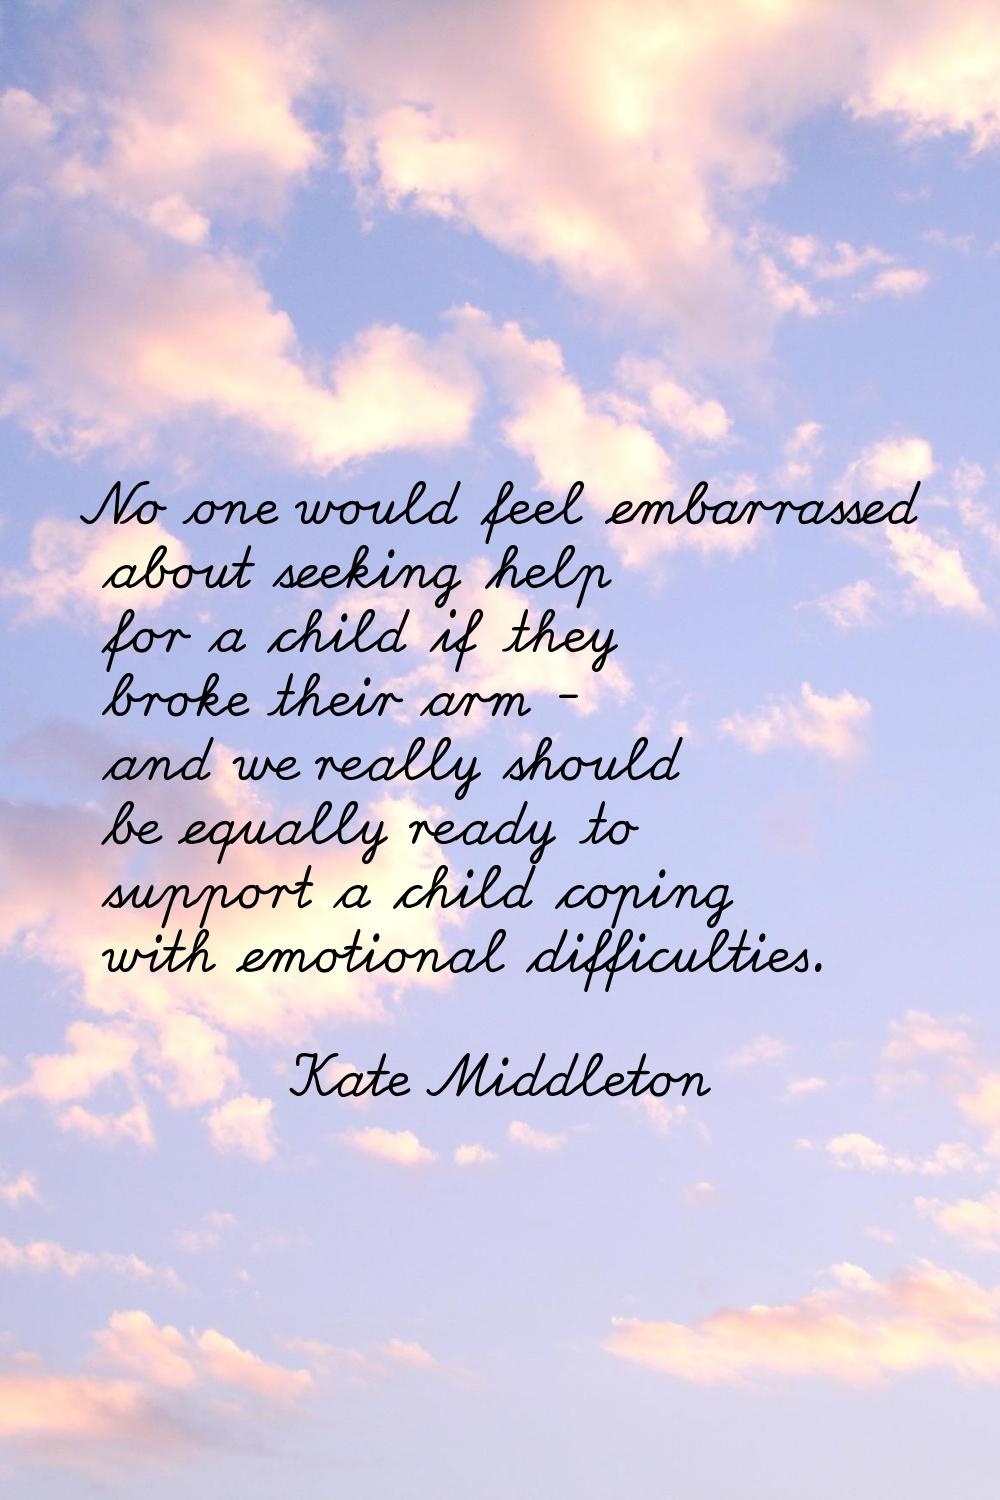 No one would feel embarrassed about seeking help for a child if they broke their arm - and we reall